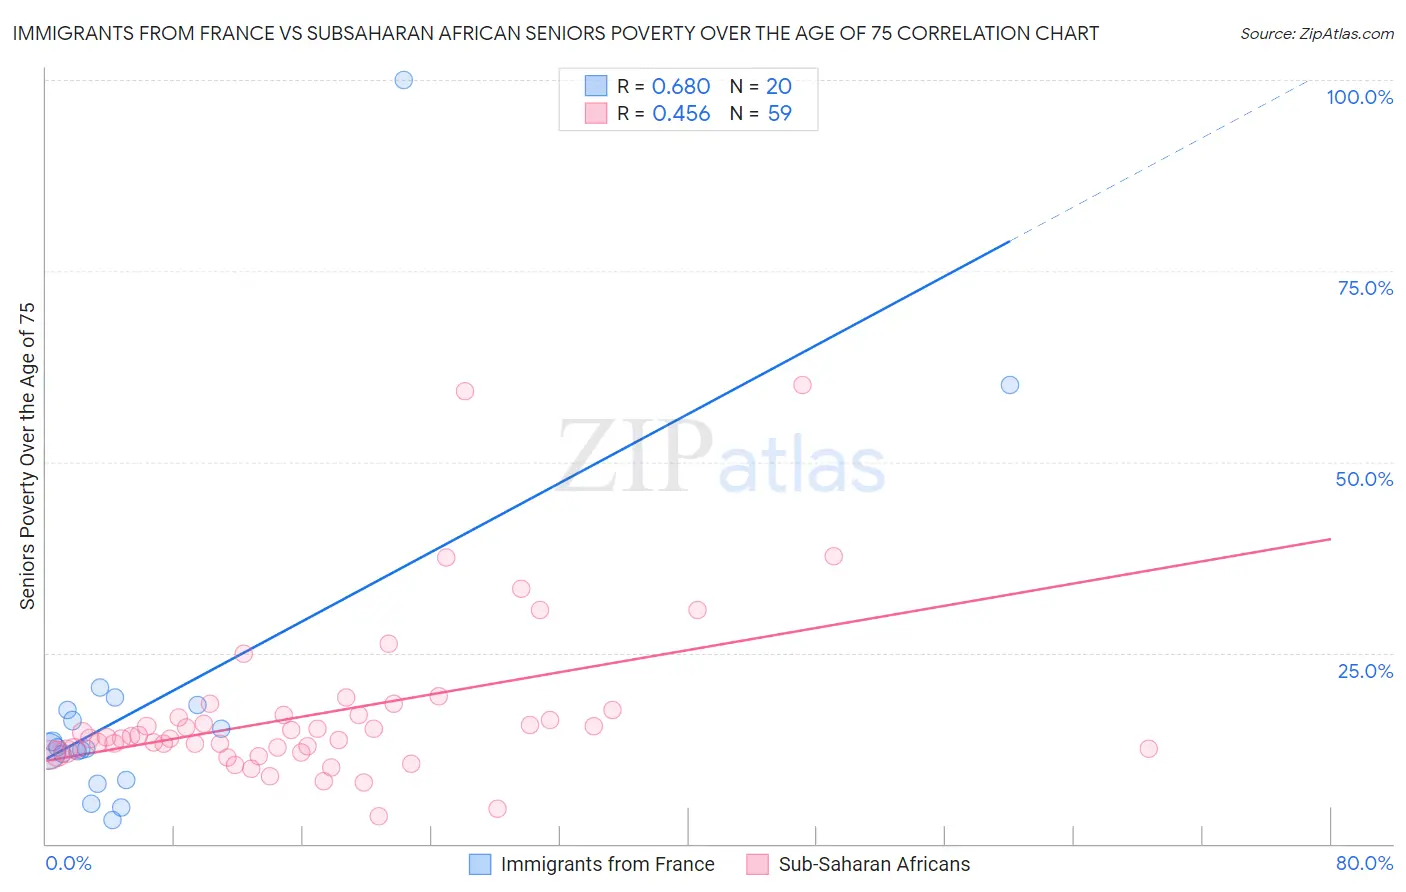 Immigrants from France vs Subsaharan African Seniors Poverty Over the Age of 75